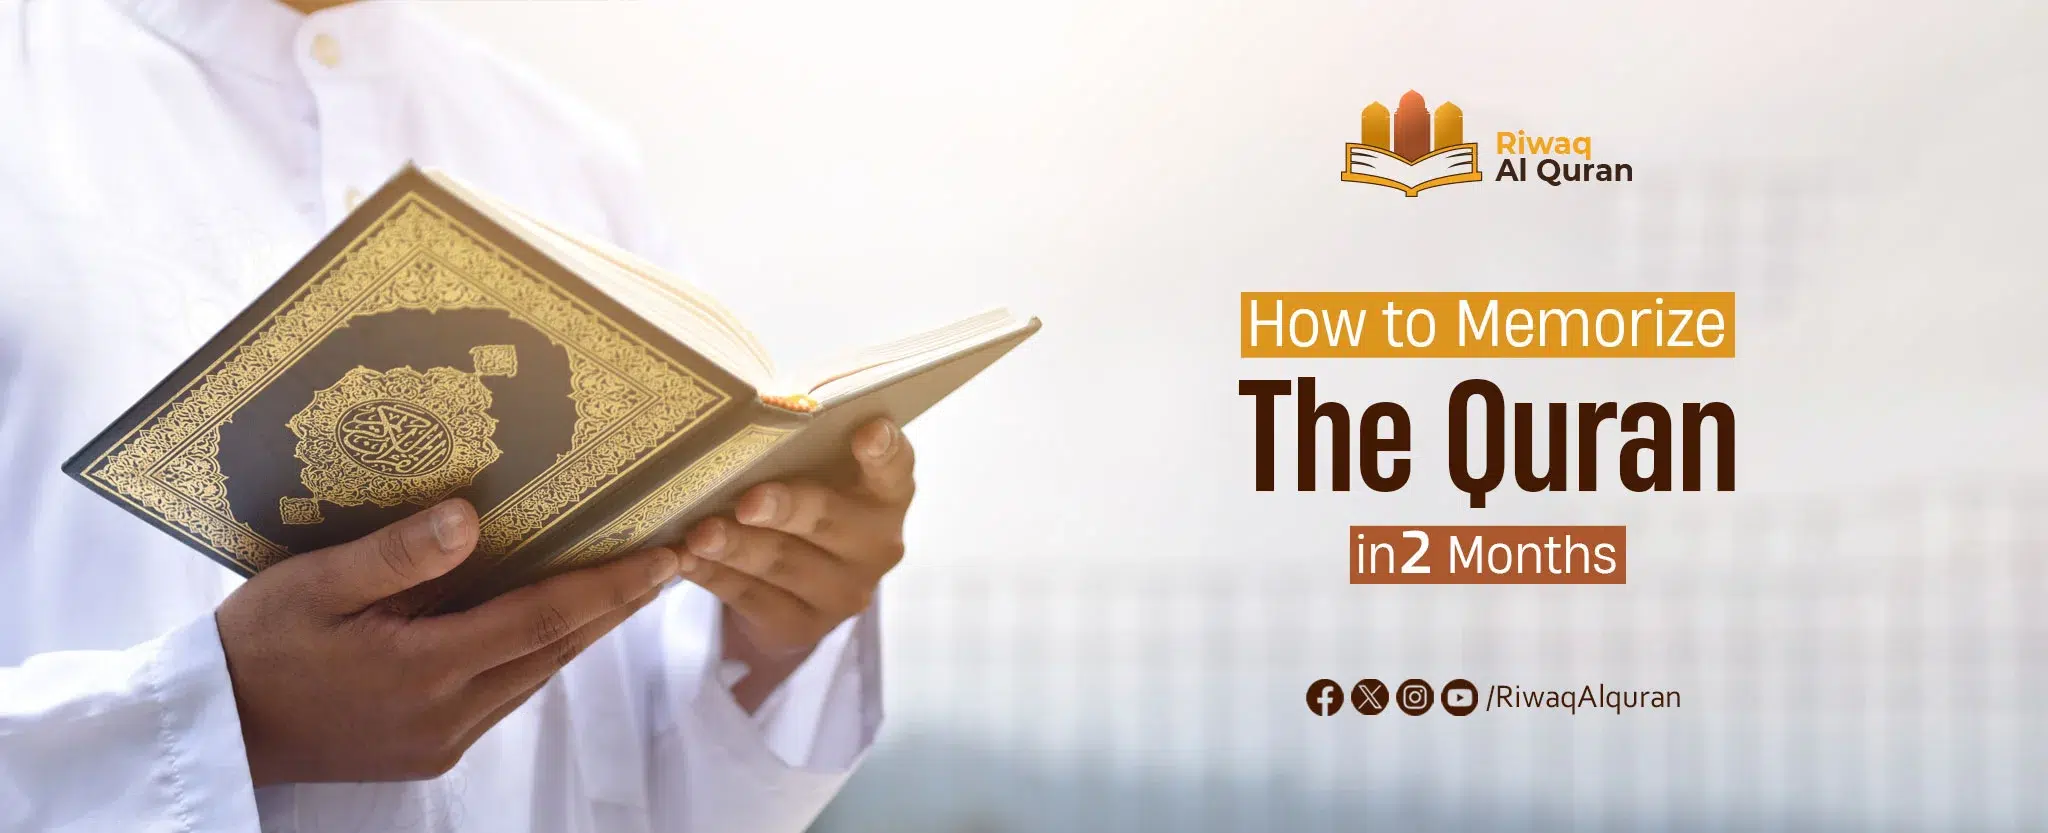 How to Memorize the Quran in 2 Months? Tips, Plans, Schedules